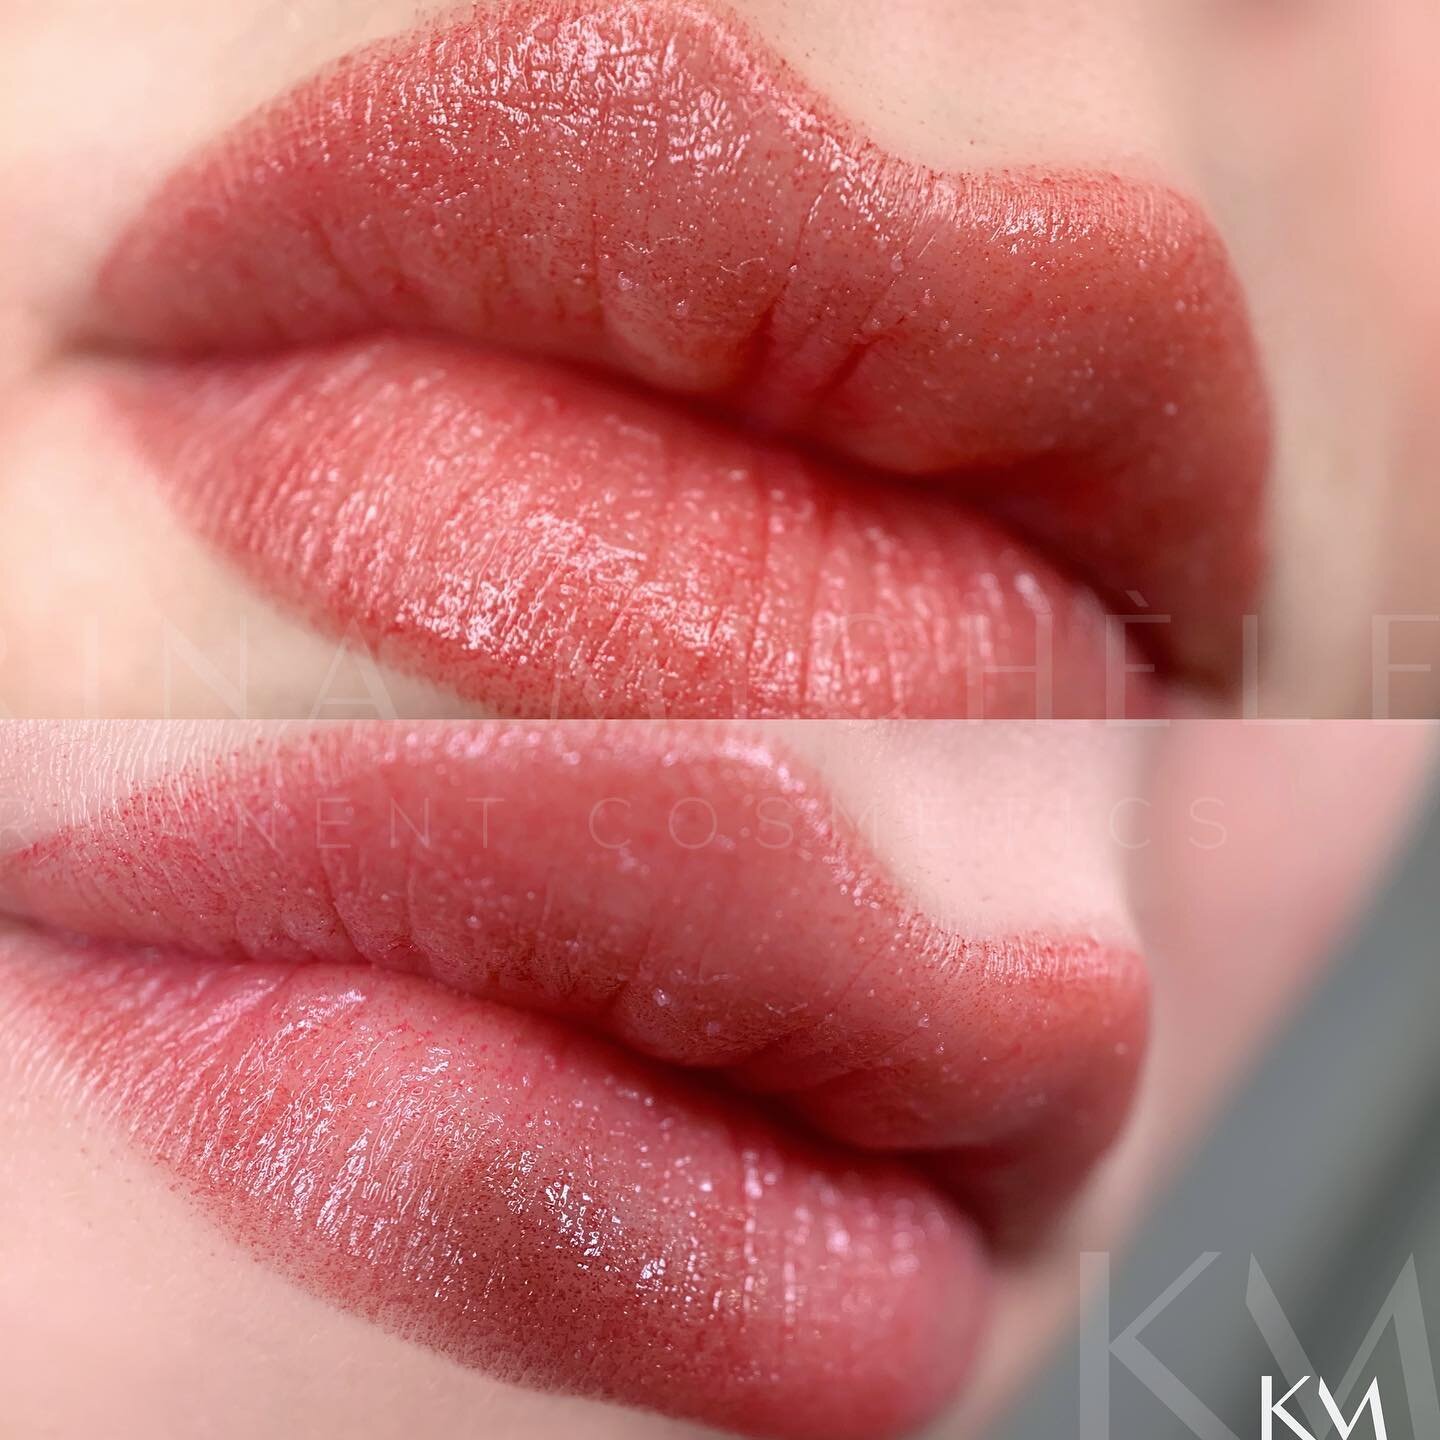 Lip blush tattoo 💋 

✨$690 for two sessions 6-8 weeks apart
✨Pain is minimal. We use numbing gel, however the lips are the most sensitive part of the face so they will be sore after.
✨ Results can last anywhere from 1-5+ years depending on the techn